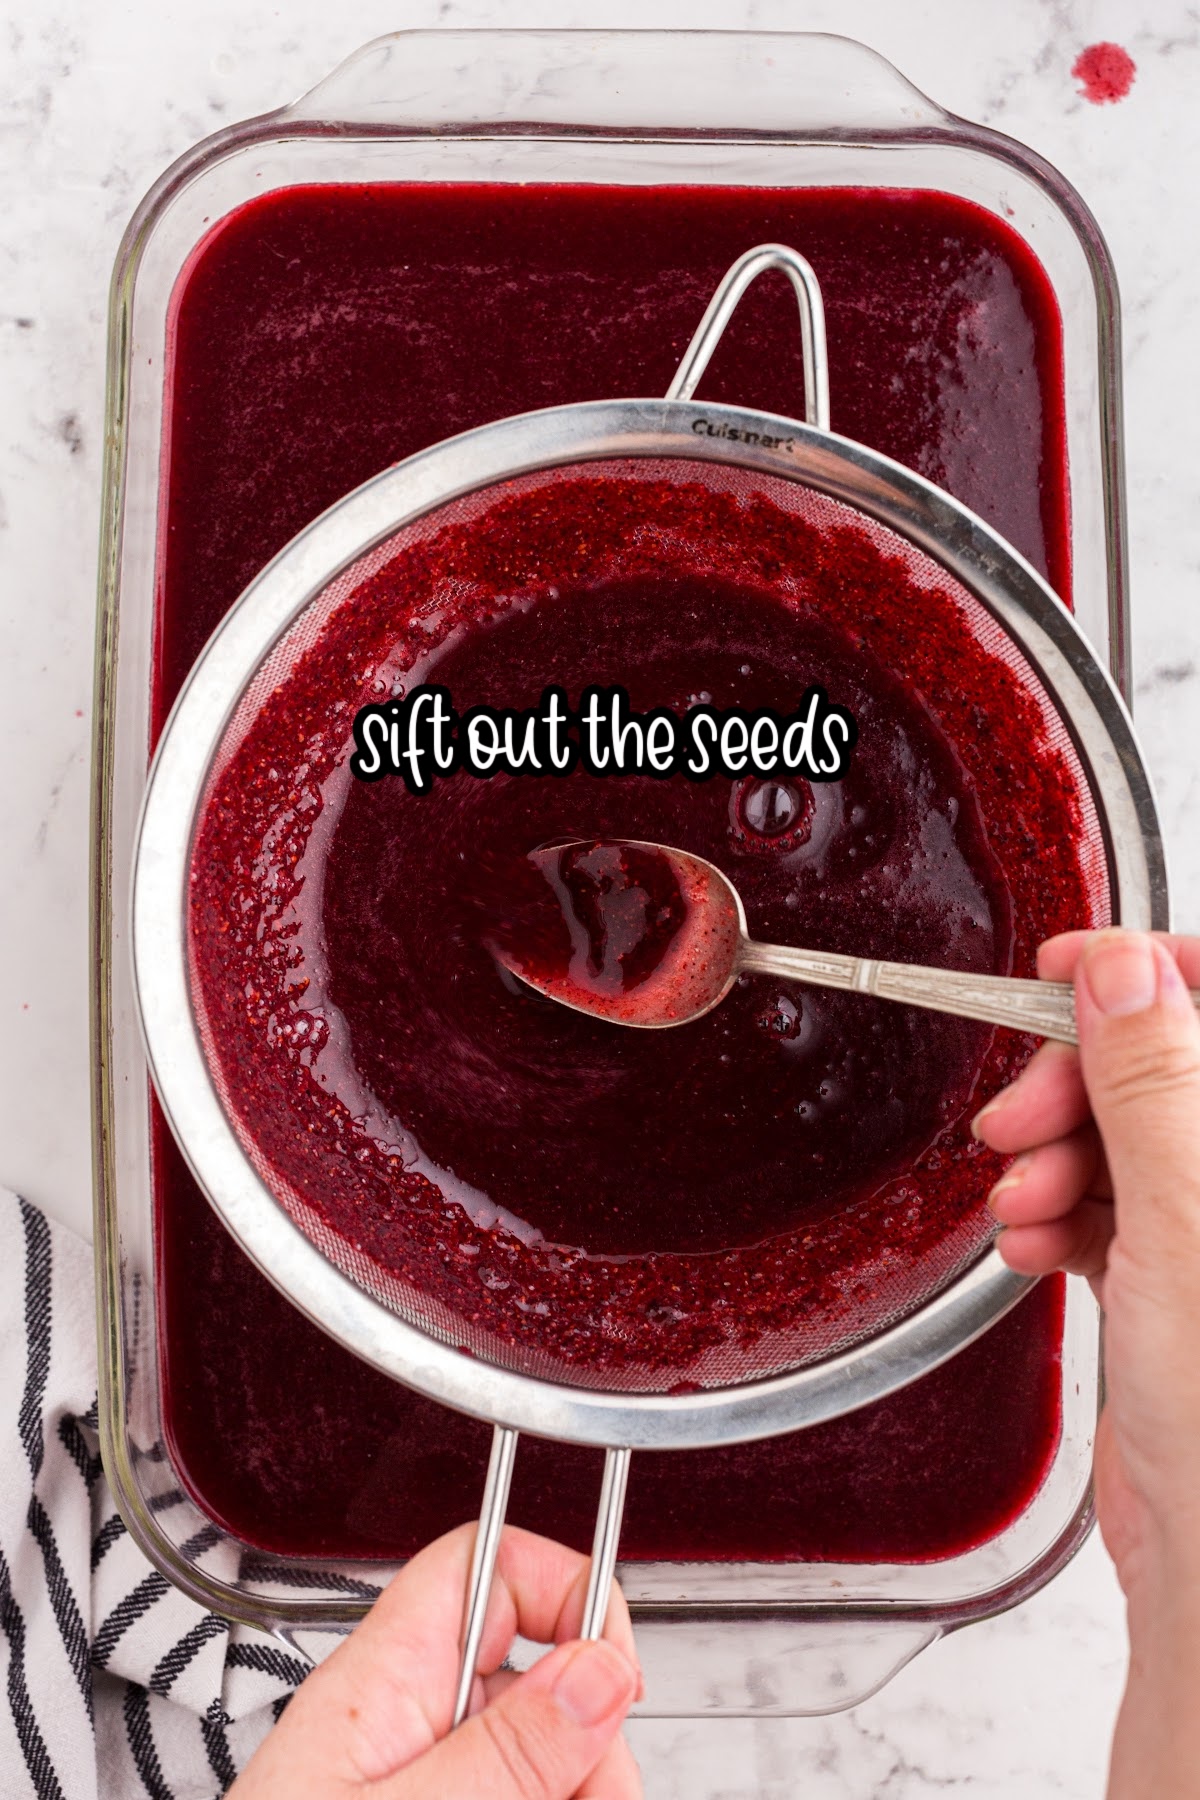 Seeds being sifted from the berry mixture with text overlay.